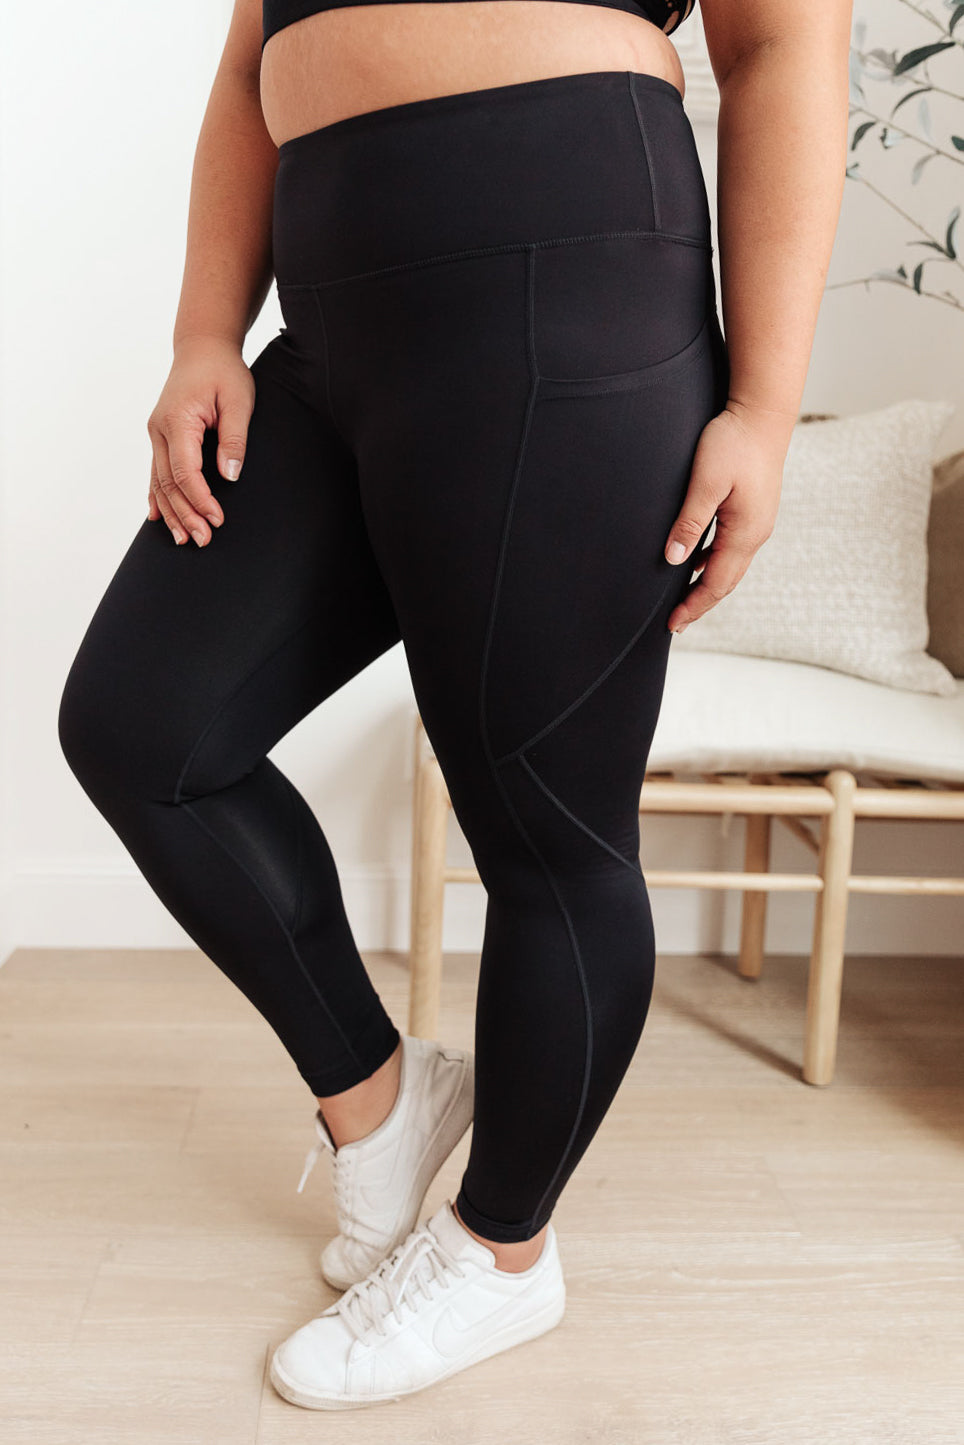 Black Leggings from Soaked in Luxury – Shop Black Leggings from size XS-XXL  here